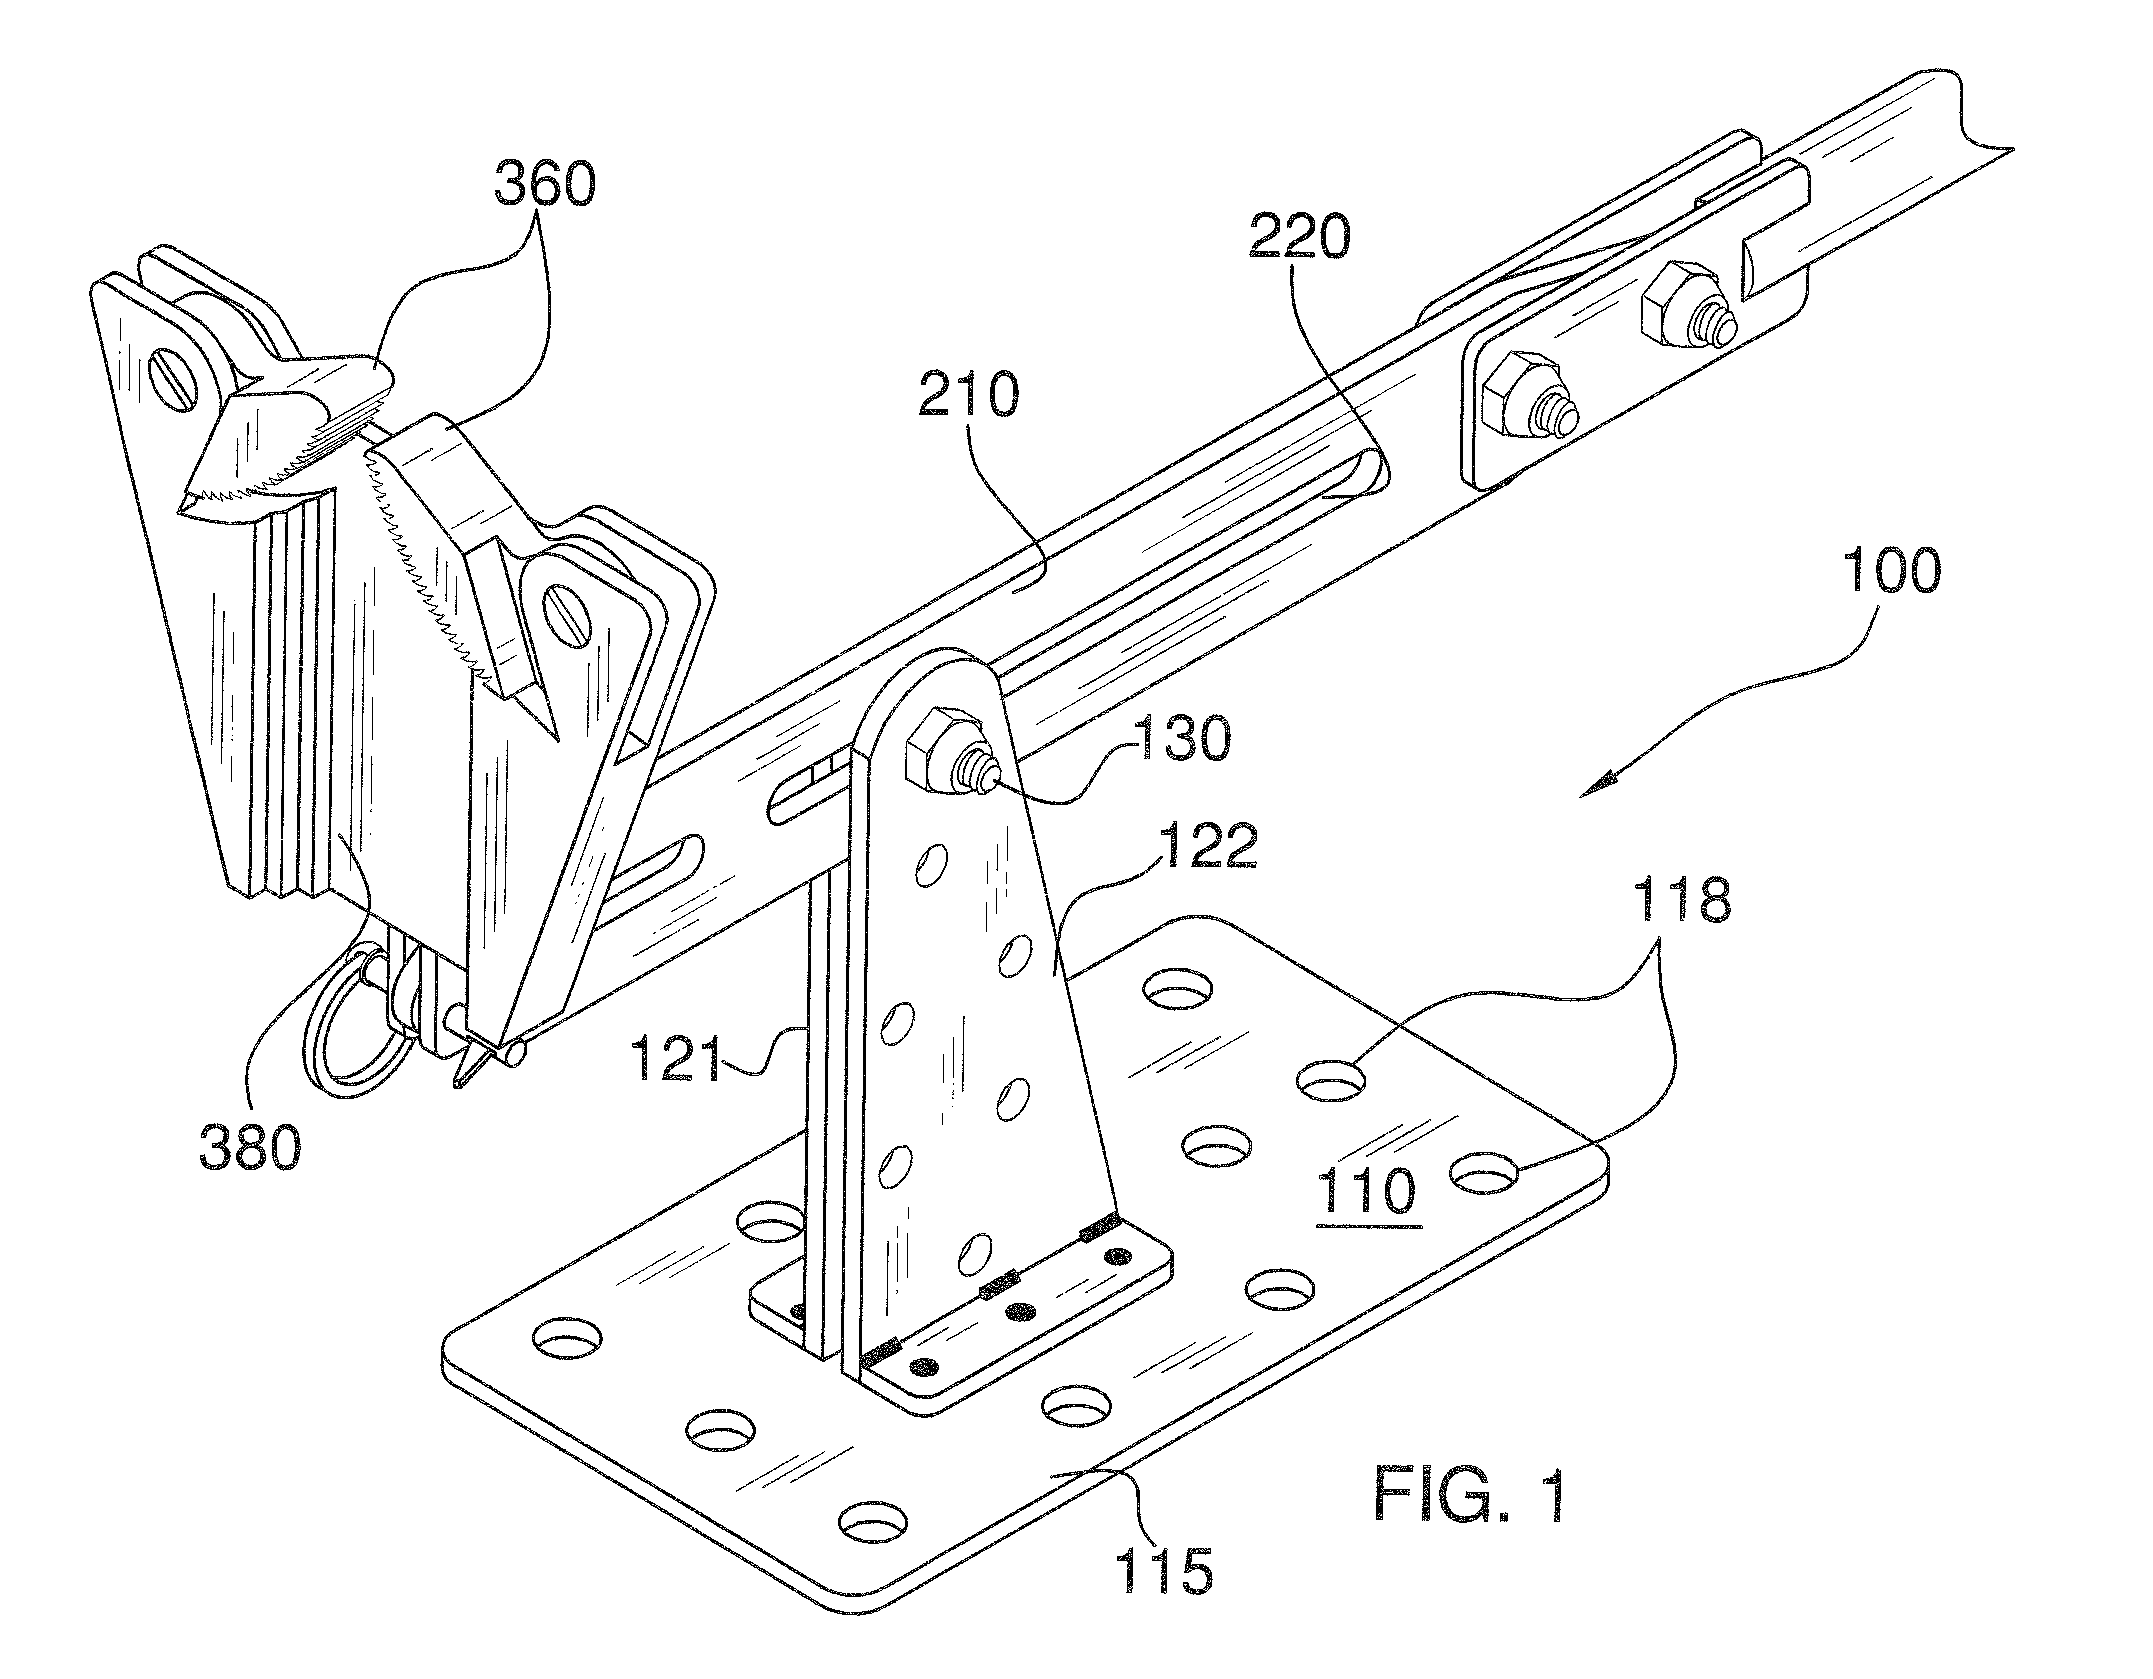 Multi-sized wood and metal stake pulling device